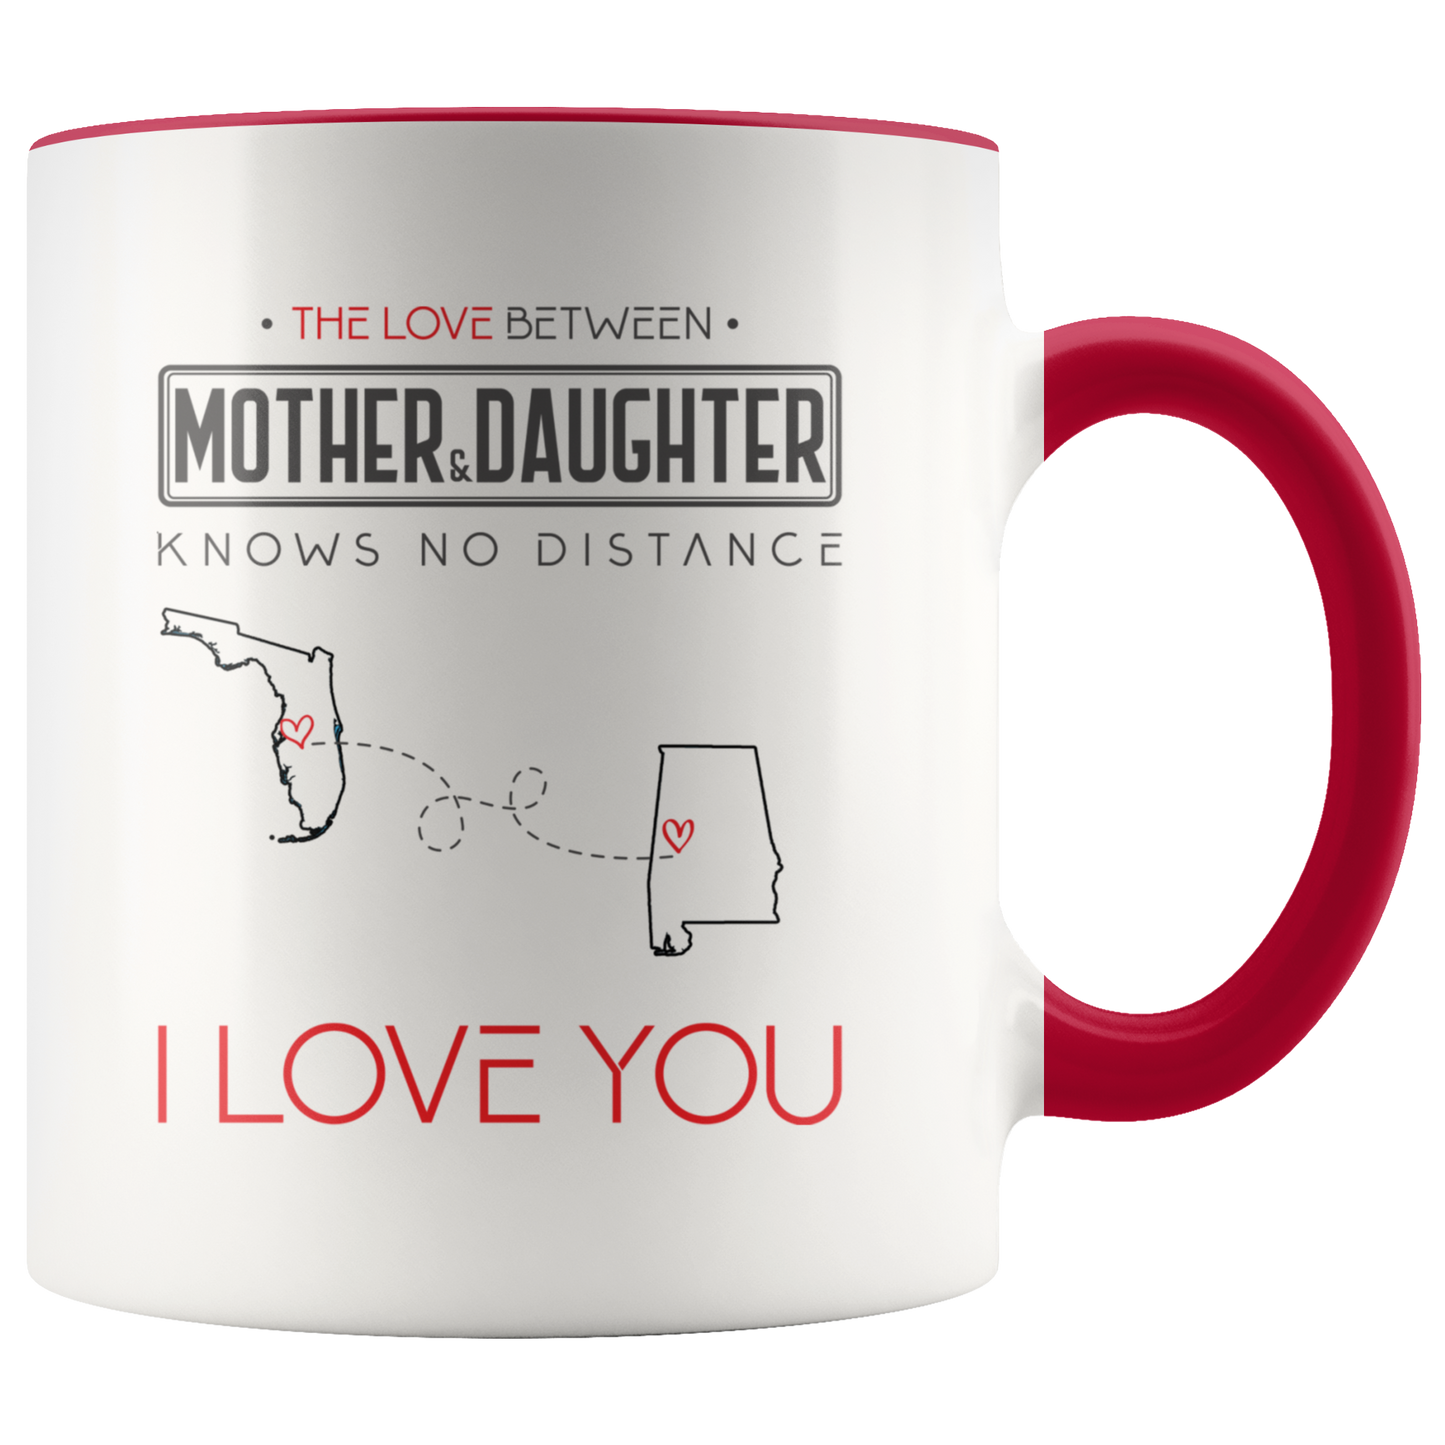 ND-21314080-sp-23852 - [ Florida | Alabama ]Mom And Daughter Accent Mug 11 oz Red - The Love Between Mot